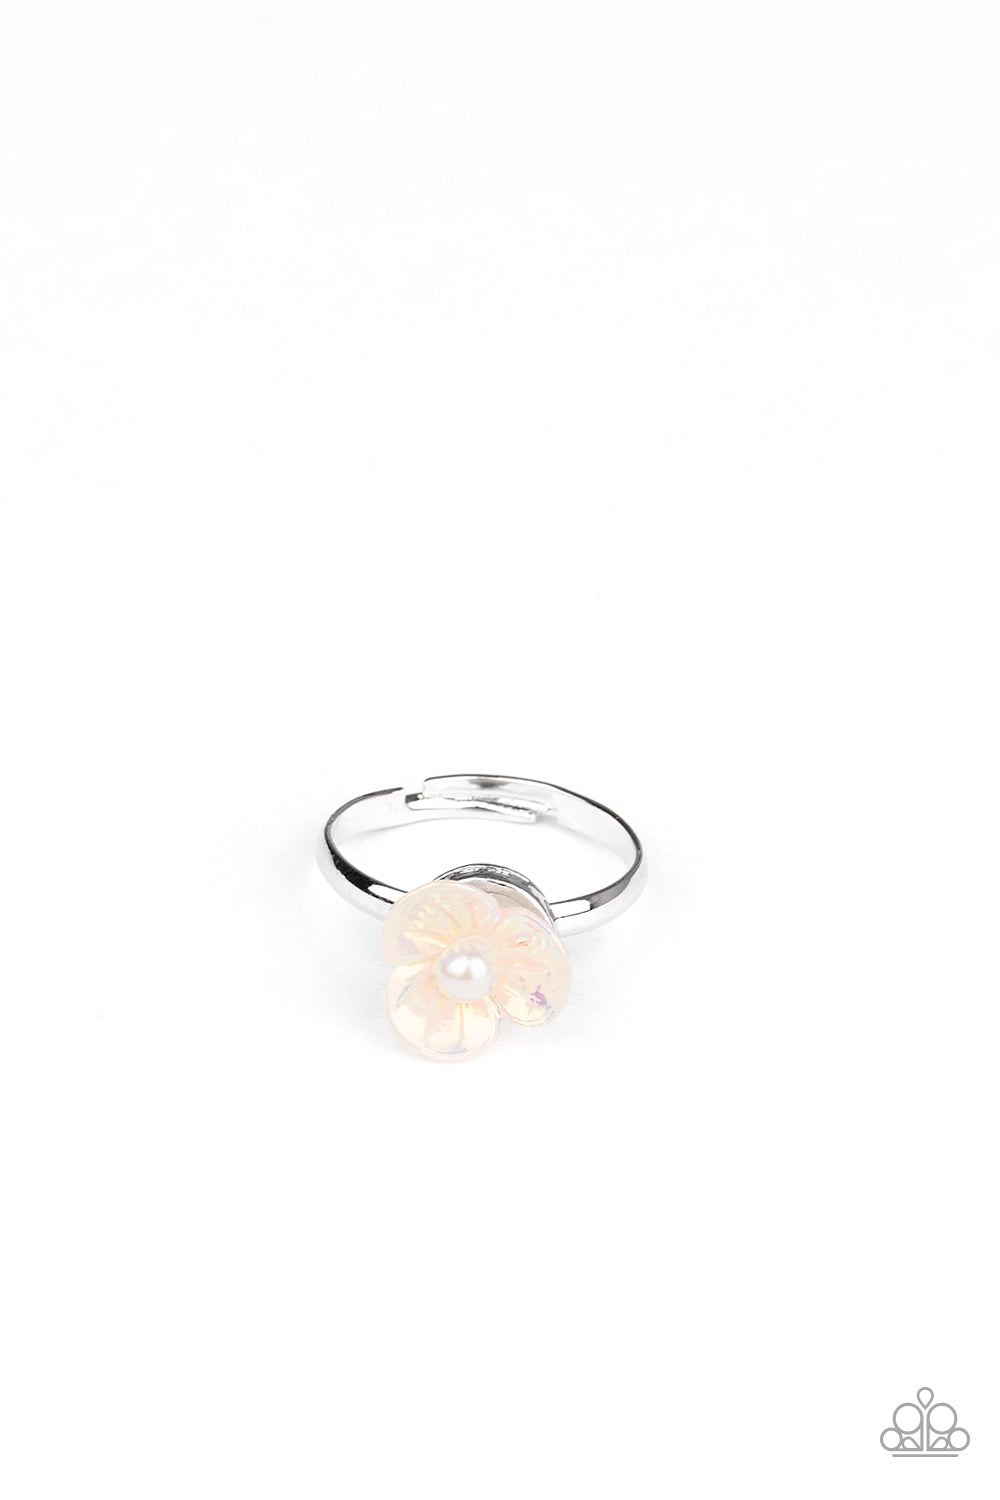 Paparazzi Starlet Shimmers Kids Ring. Floral Ring. Get Free Shipping. P4SS-MTXX-241XX